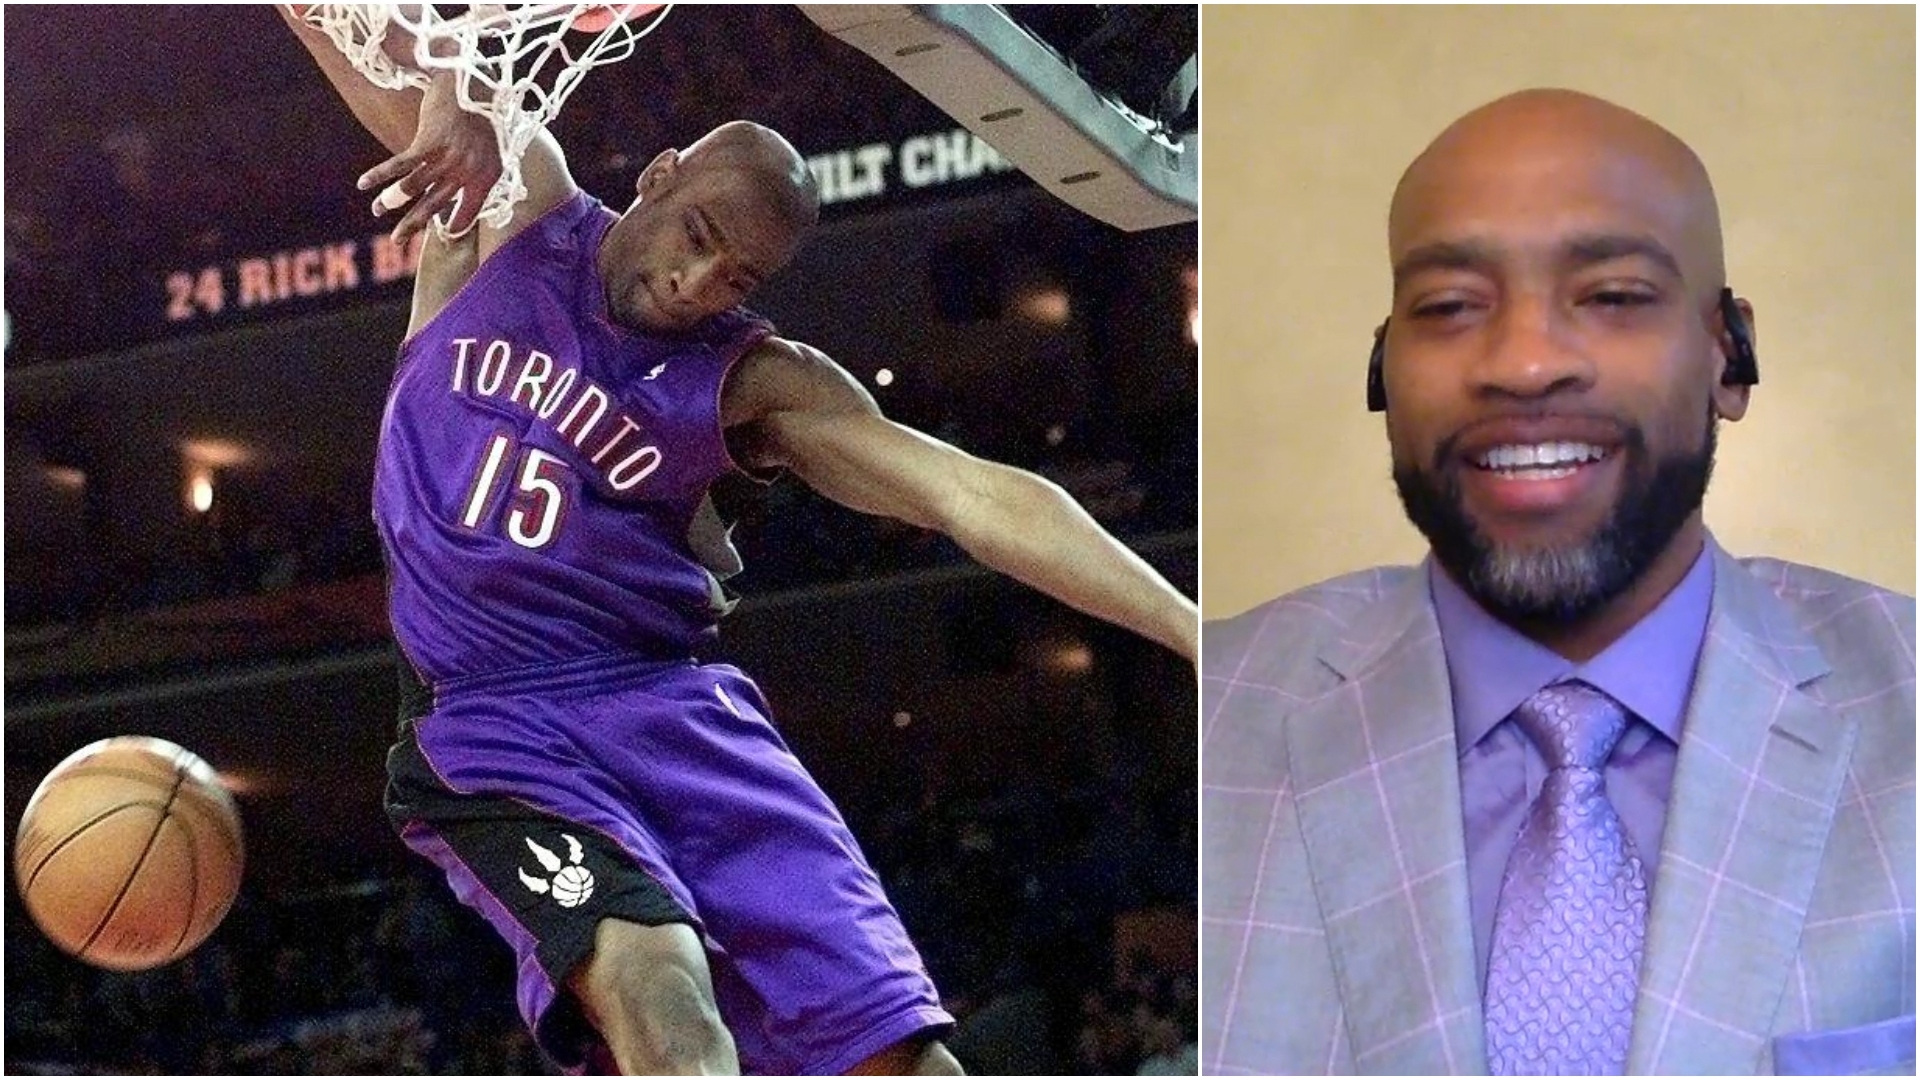 The inspiration for Vince Carter's iconic dunk